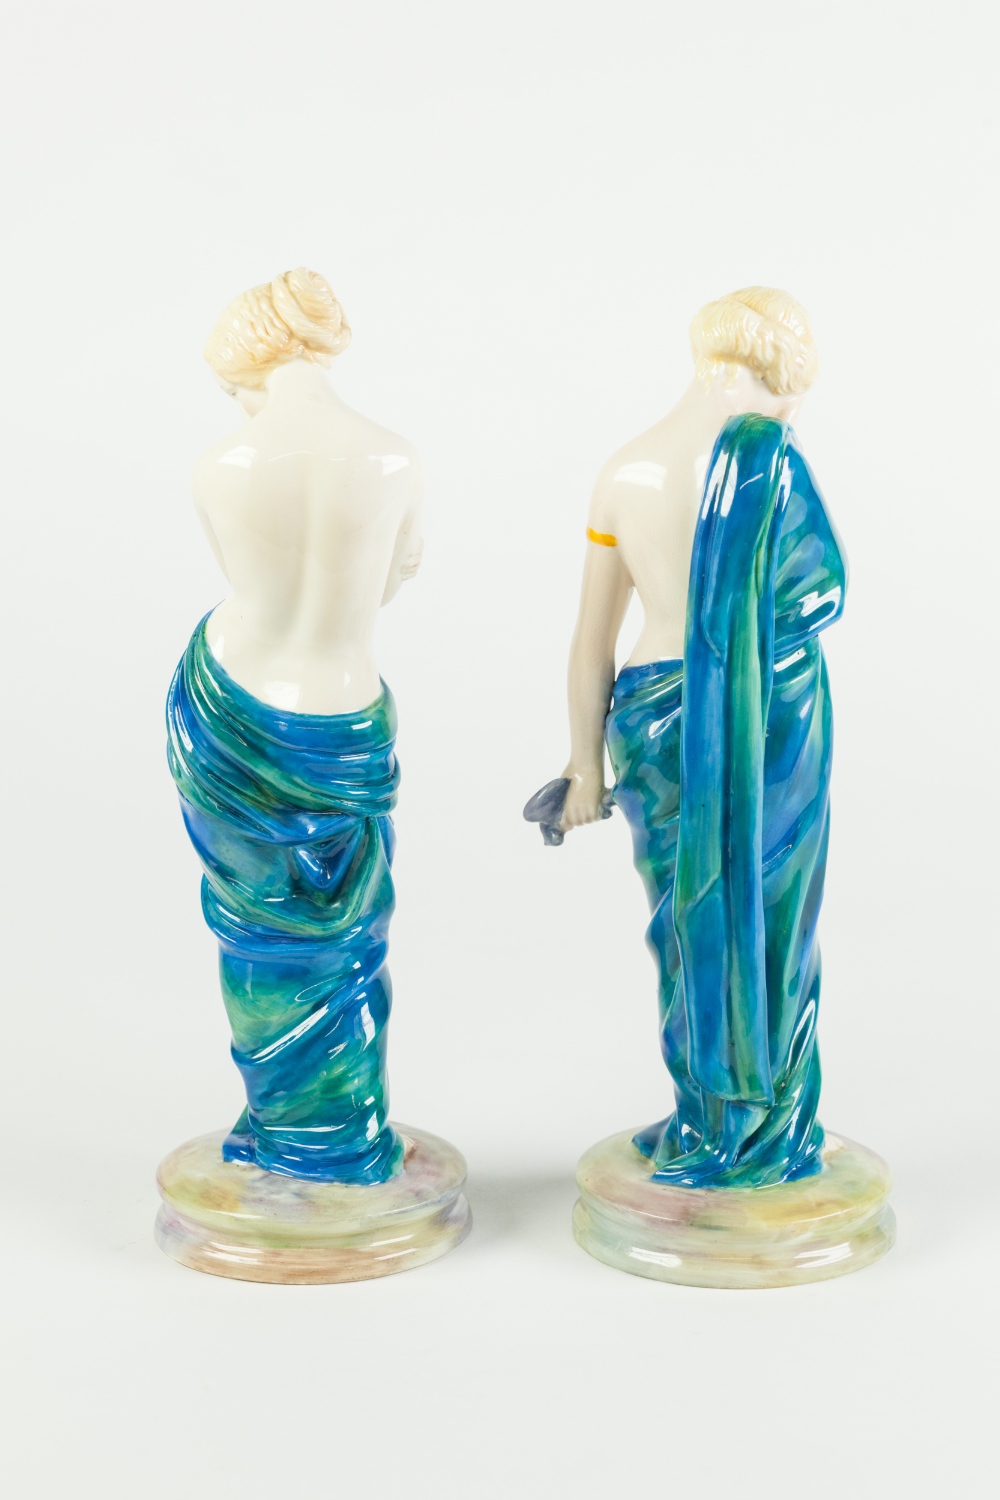 PAIR OF ROYAL WORCESTER CHINA FIGURES MODELLED BY JAMES HADLEY, 'JOY' and 'SORROW', each modelled as